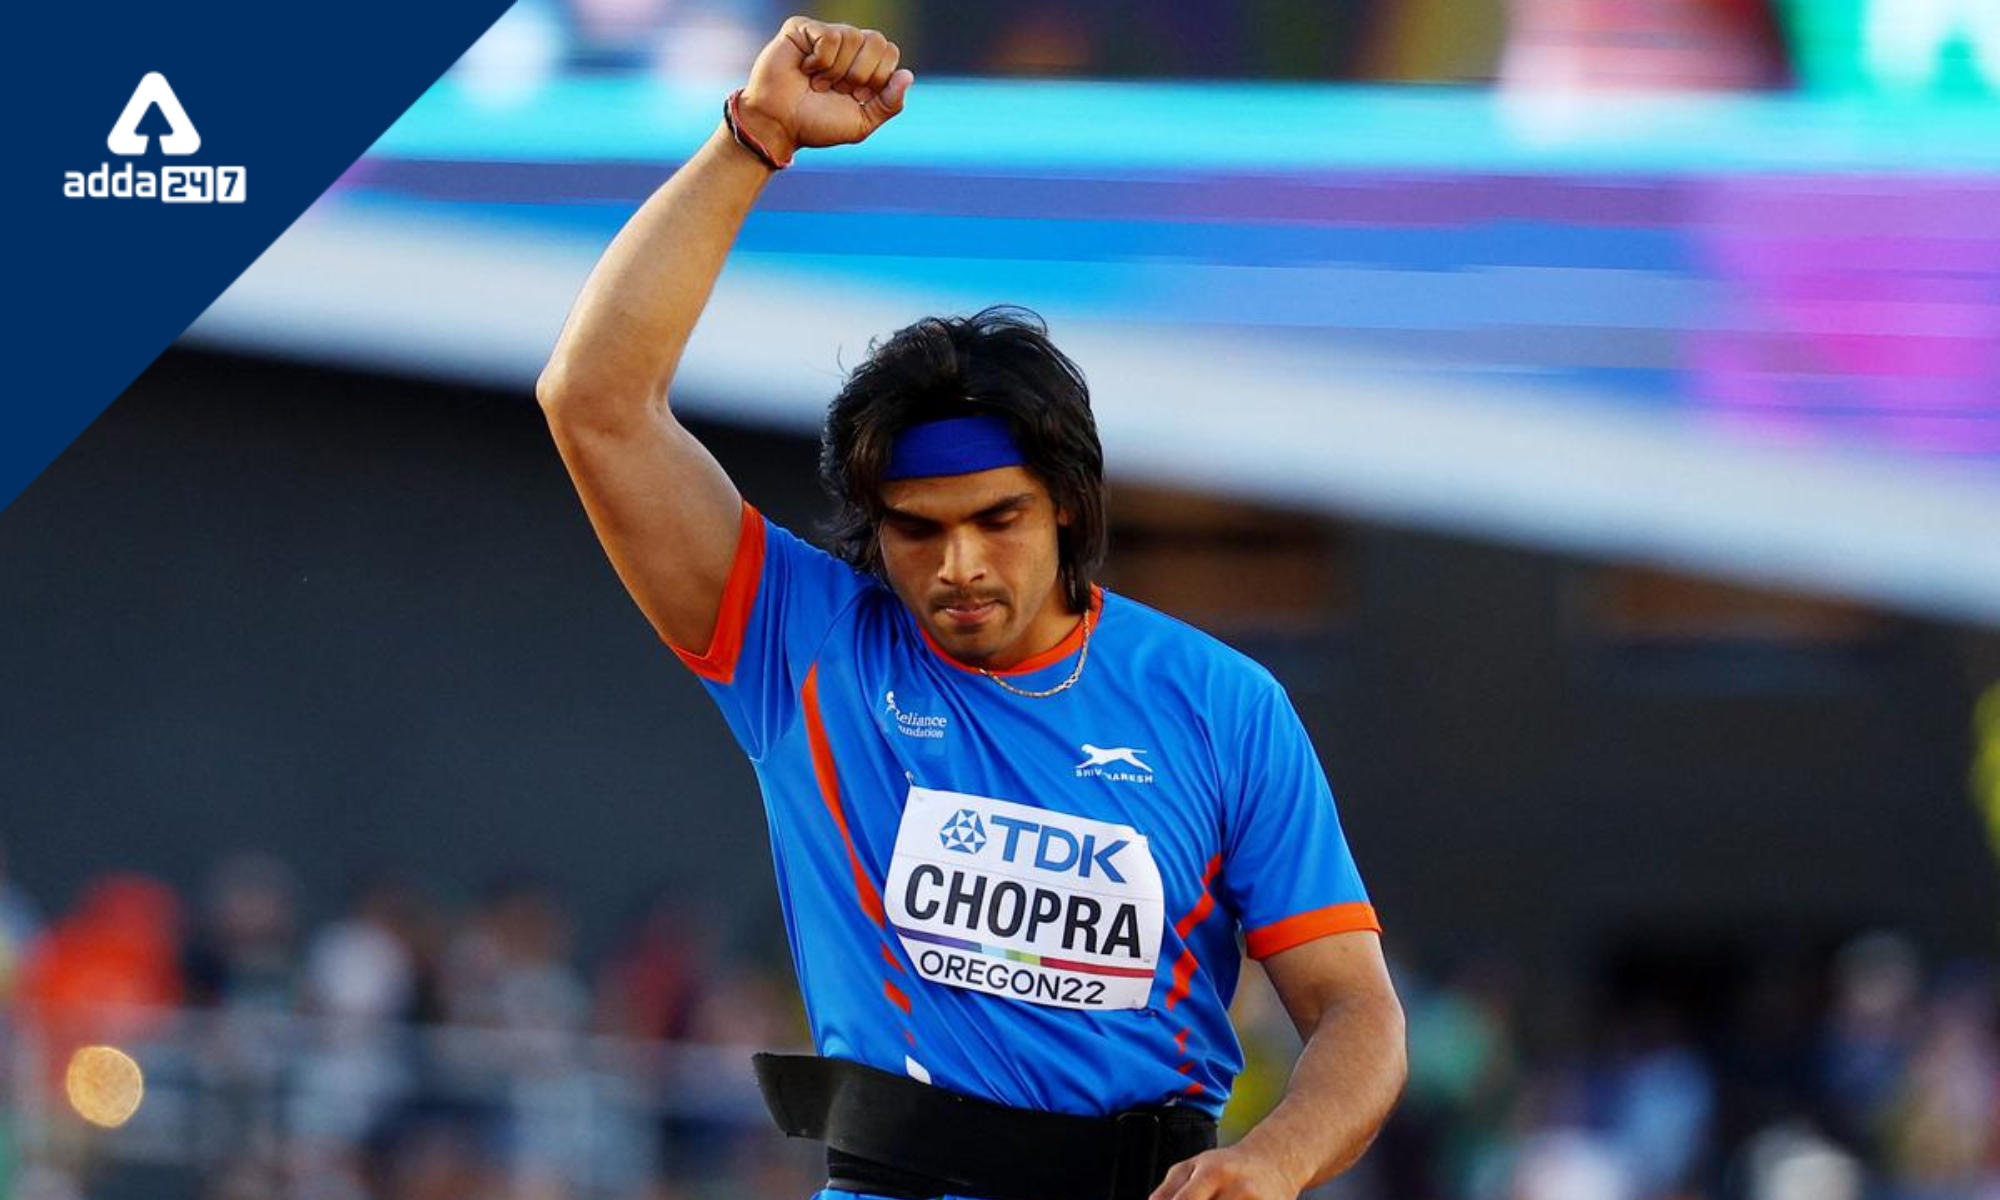 Neeraj Chopra wins a silver medal in the javelin at the world championships_30.1